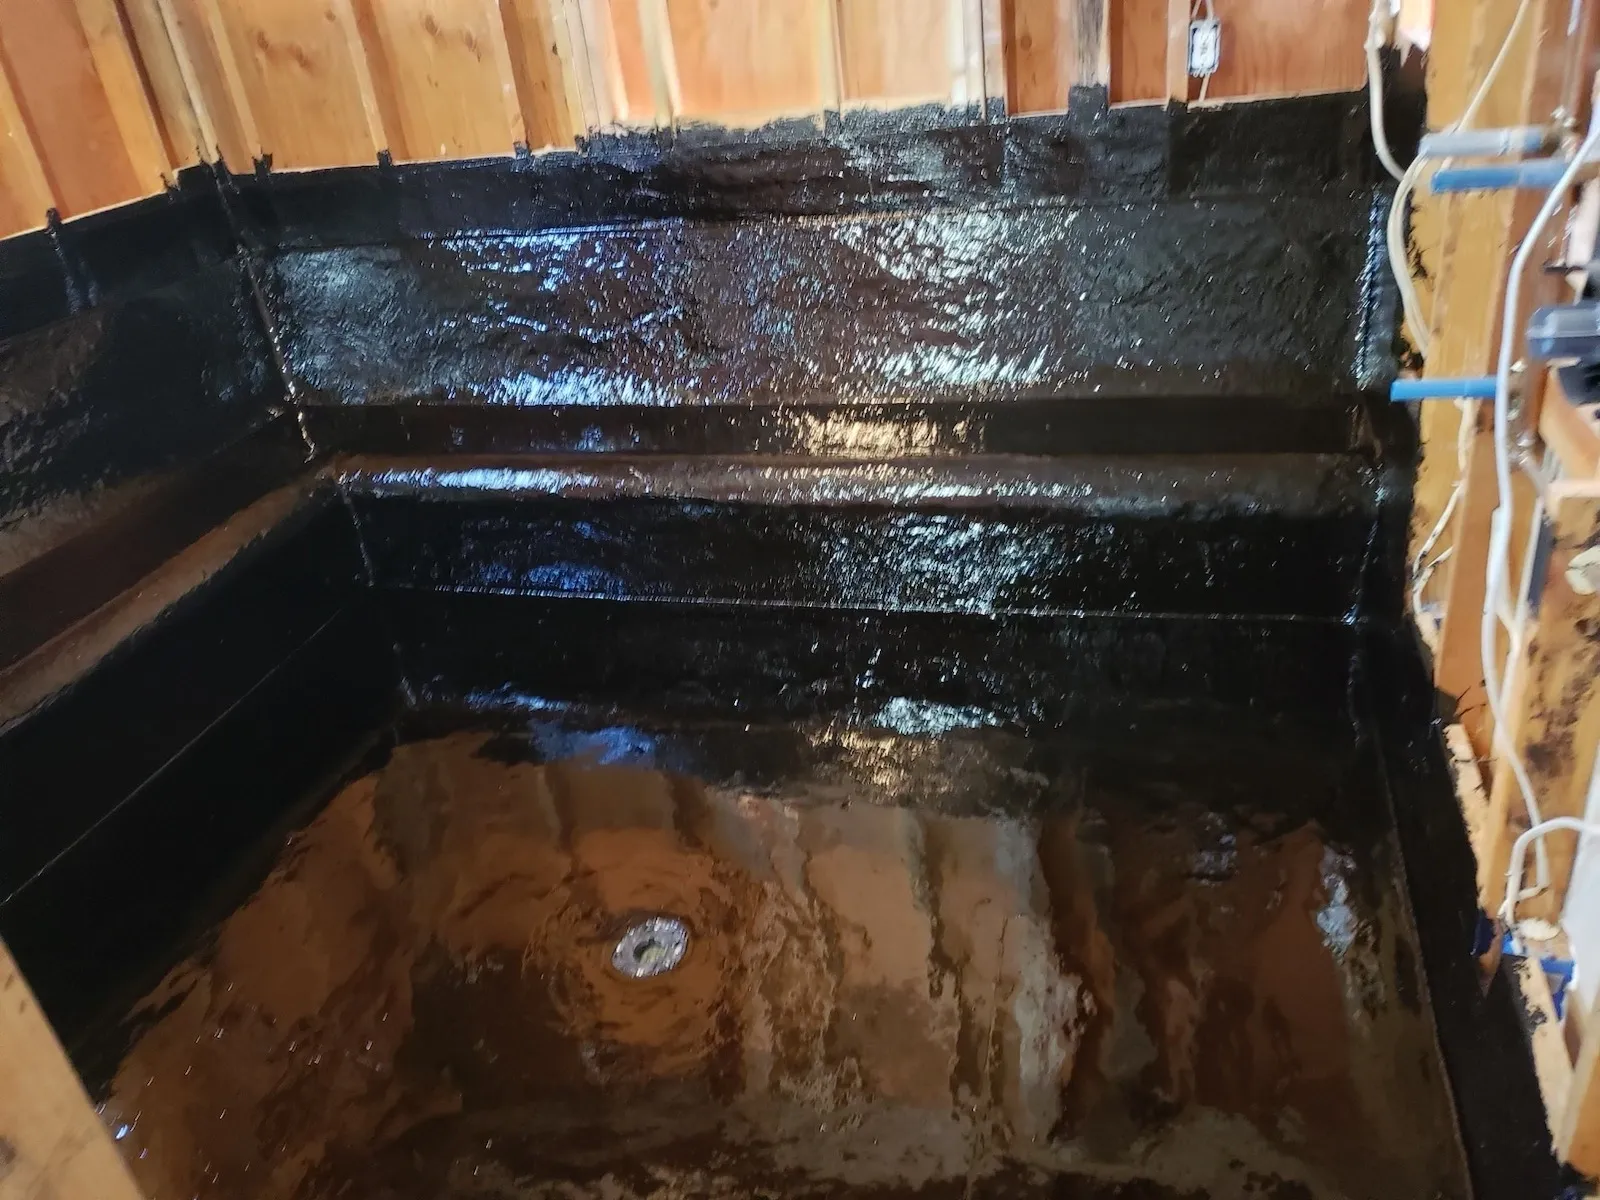 A black tub with brown water in it